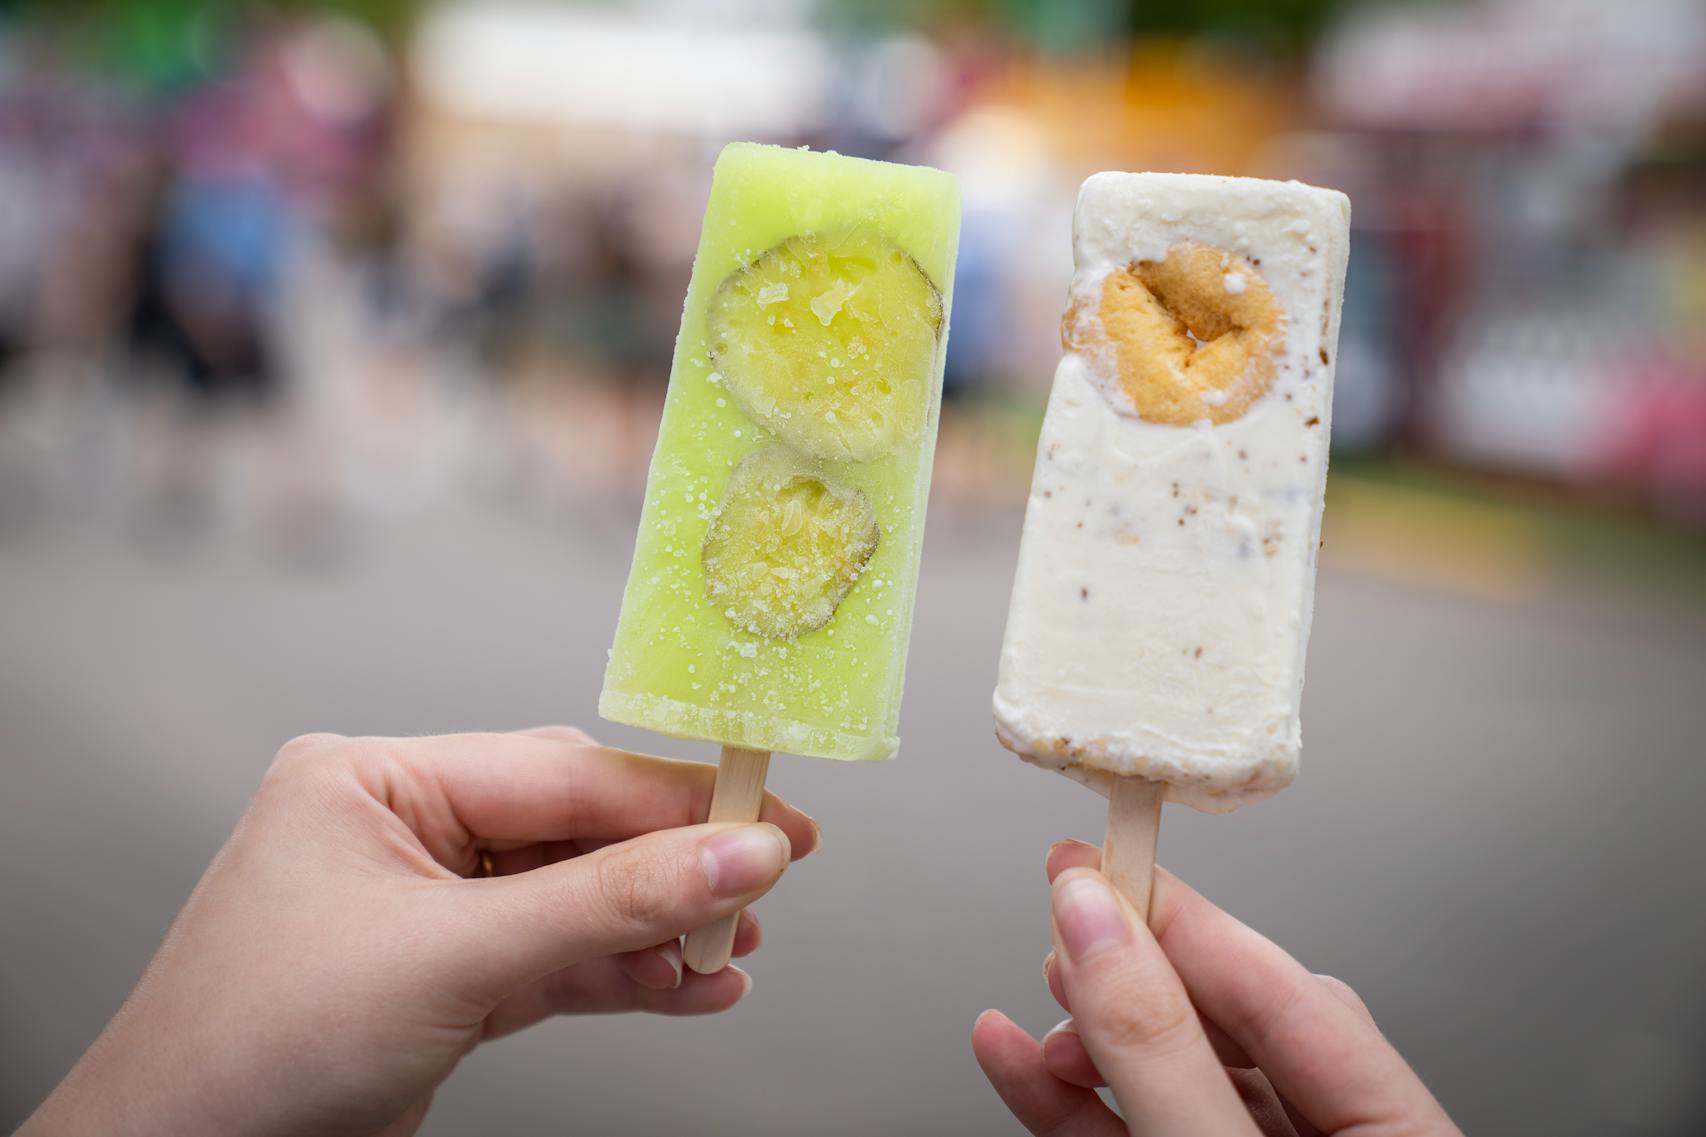 Dill PIckle Lemonade, left, and Mini Donut Paletas from Hamline Church Dining Hall. The new foods of the 2023 Minnesota State Fair photographed on the first day of the fair in Falcon Heights, Minn. on Tuesday, Aug. 8, 2023. ] LEILA NAVIDI • leila.navidi@startribune.com